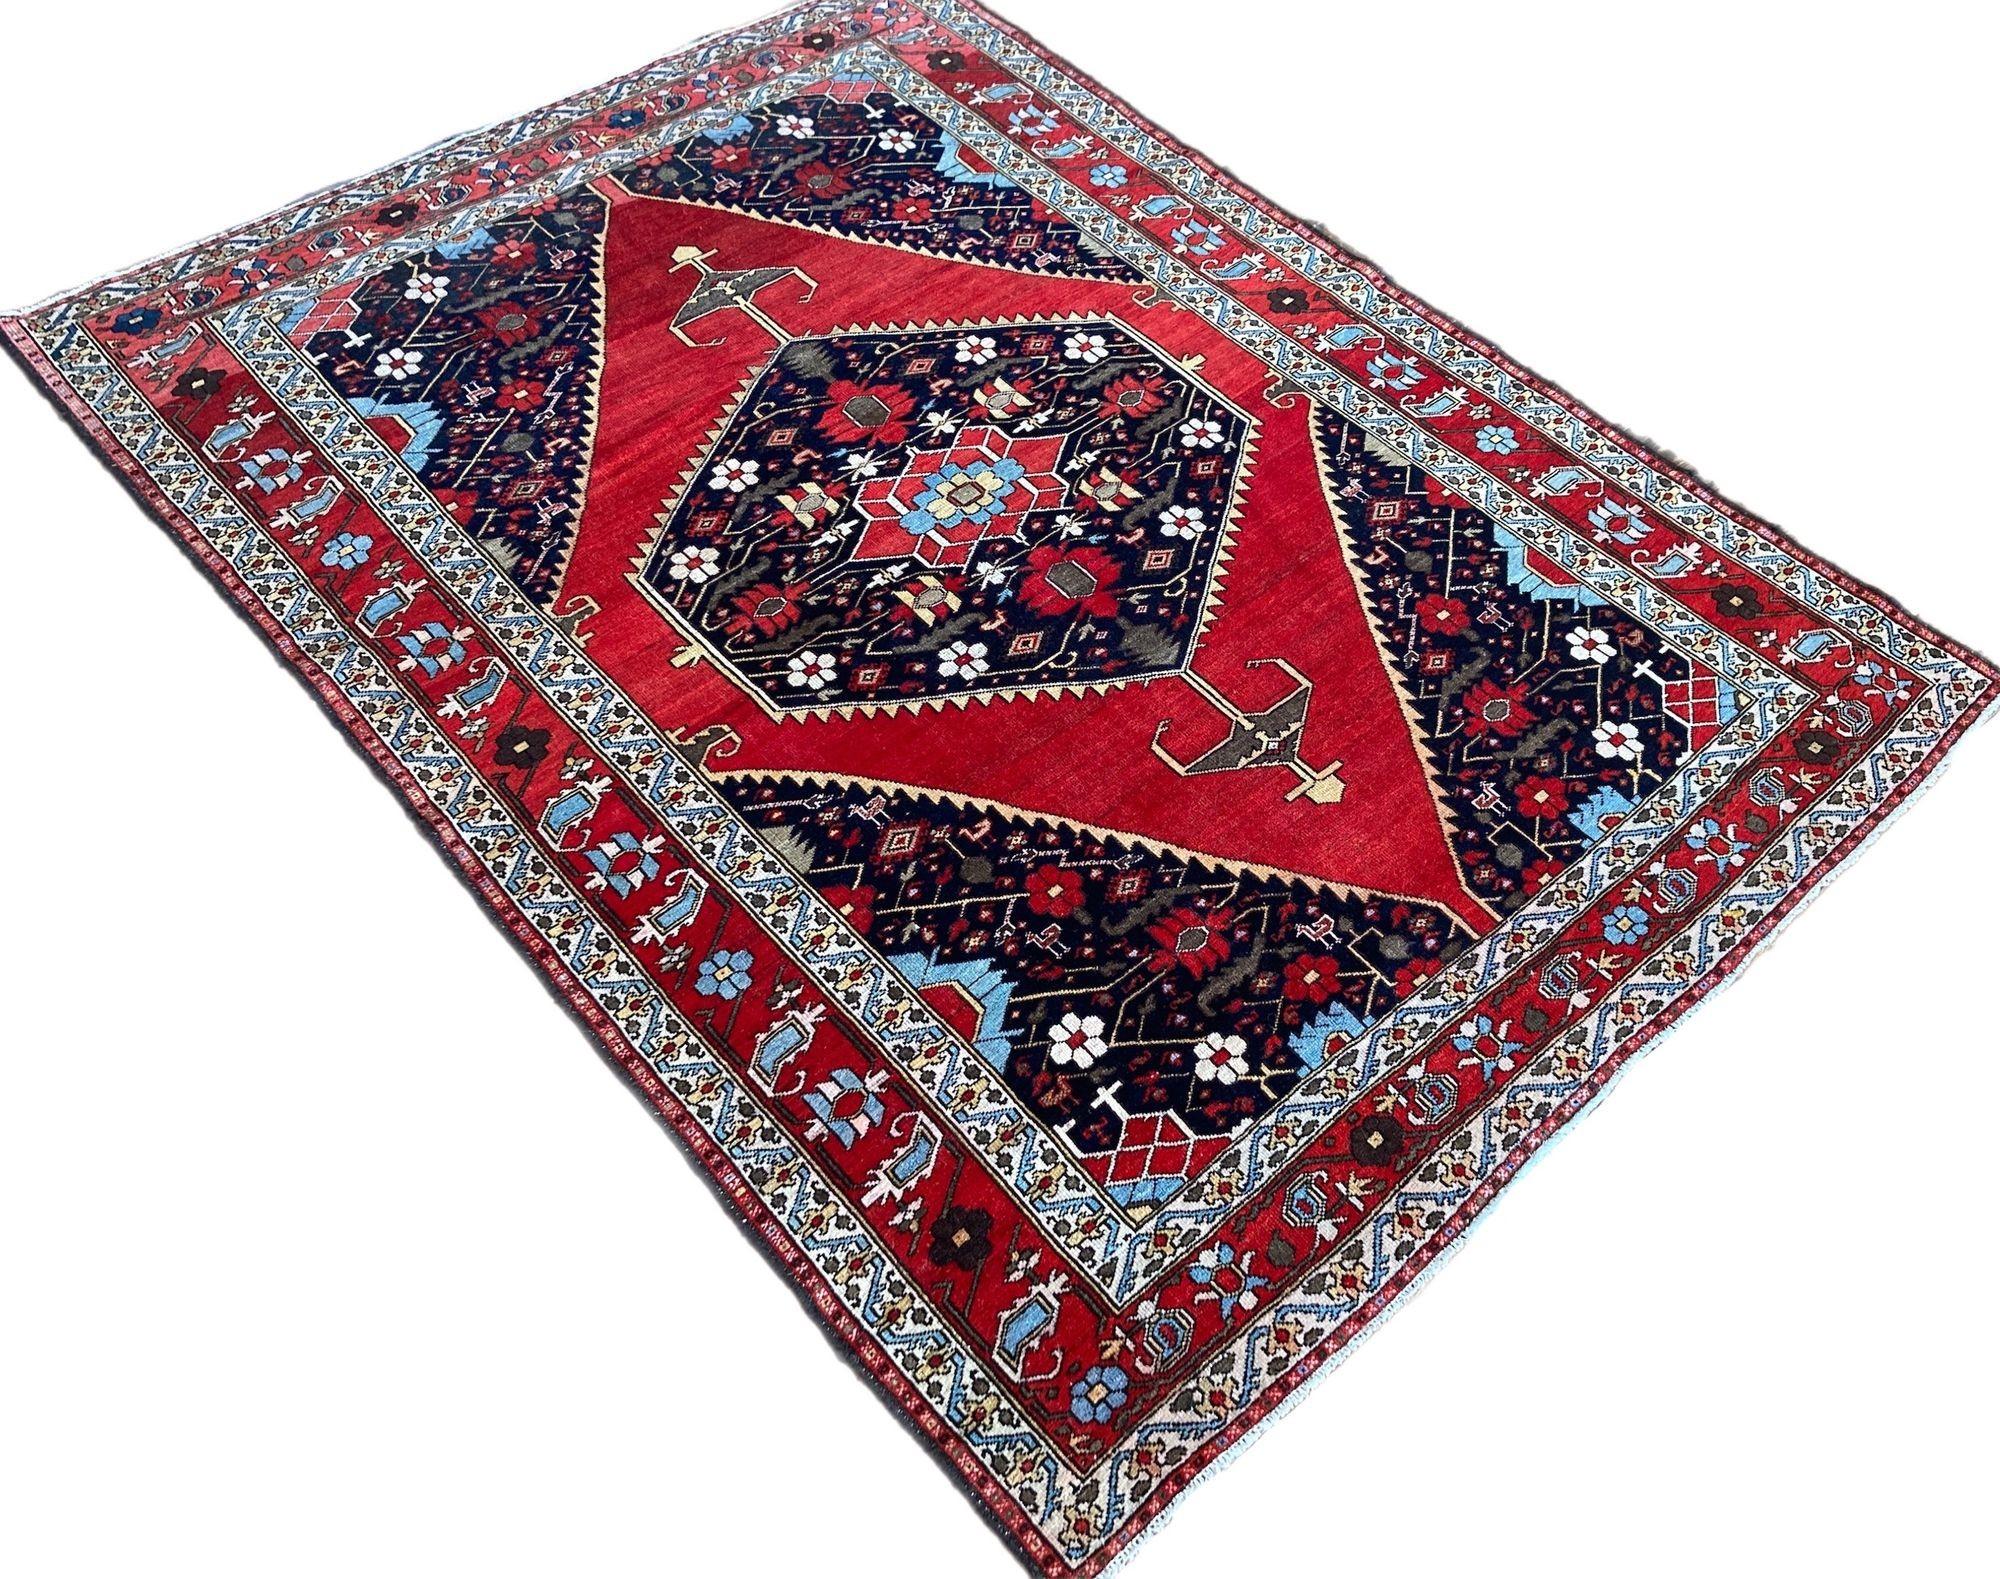 Antique Mazlagan Rug 1.87m x 1.41m In Good Condition For Sale In St. Albans, GB